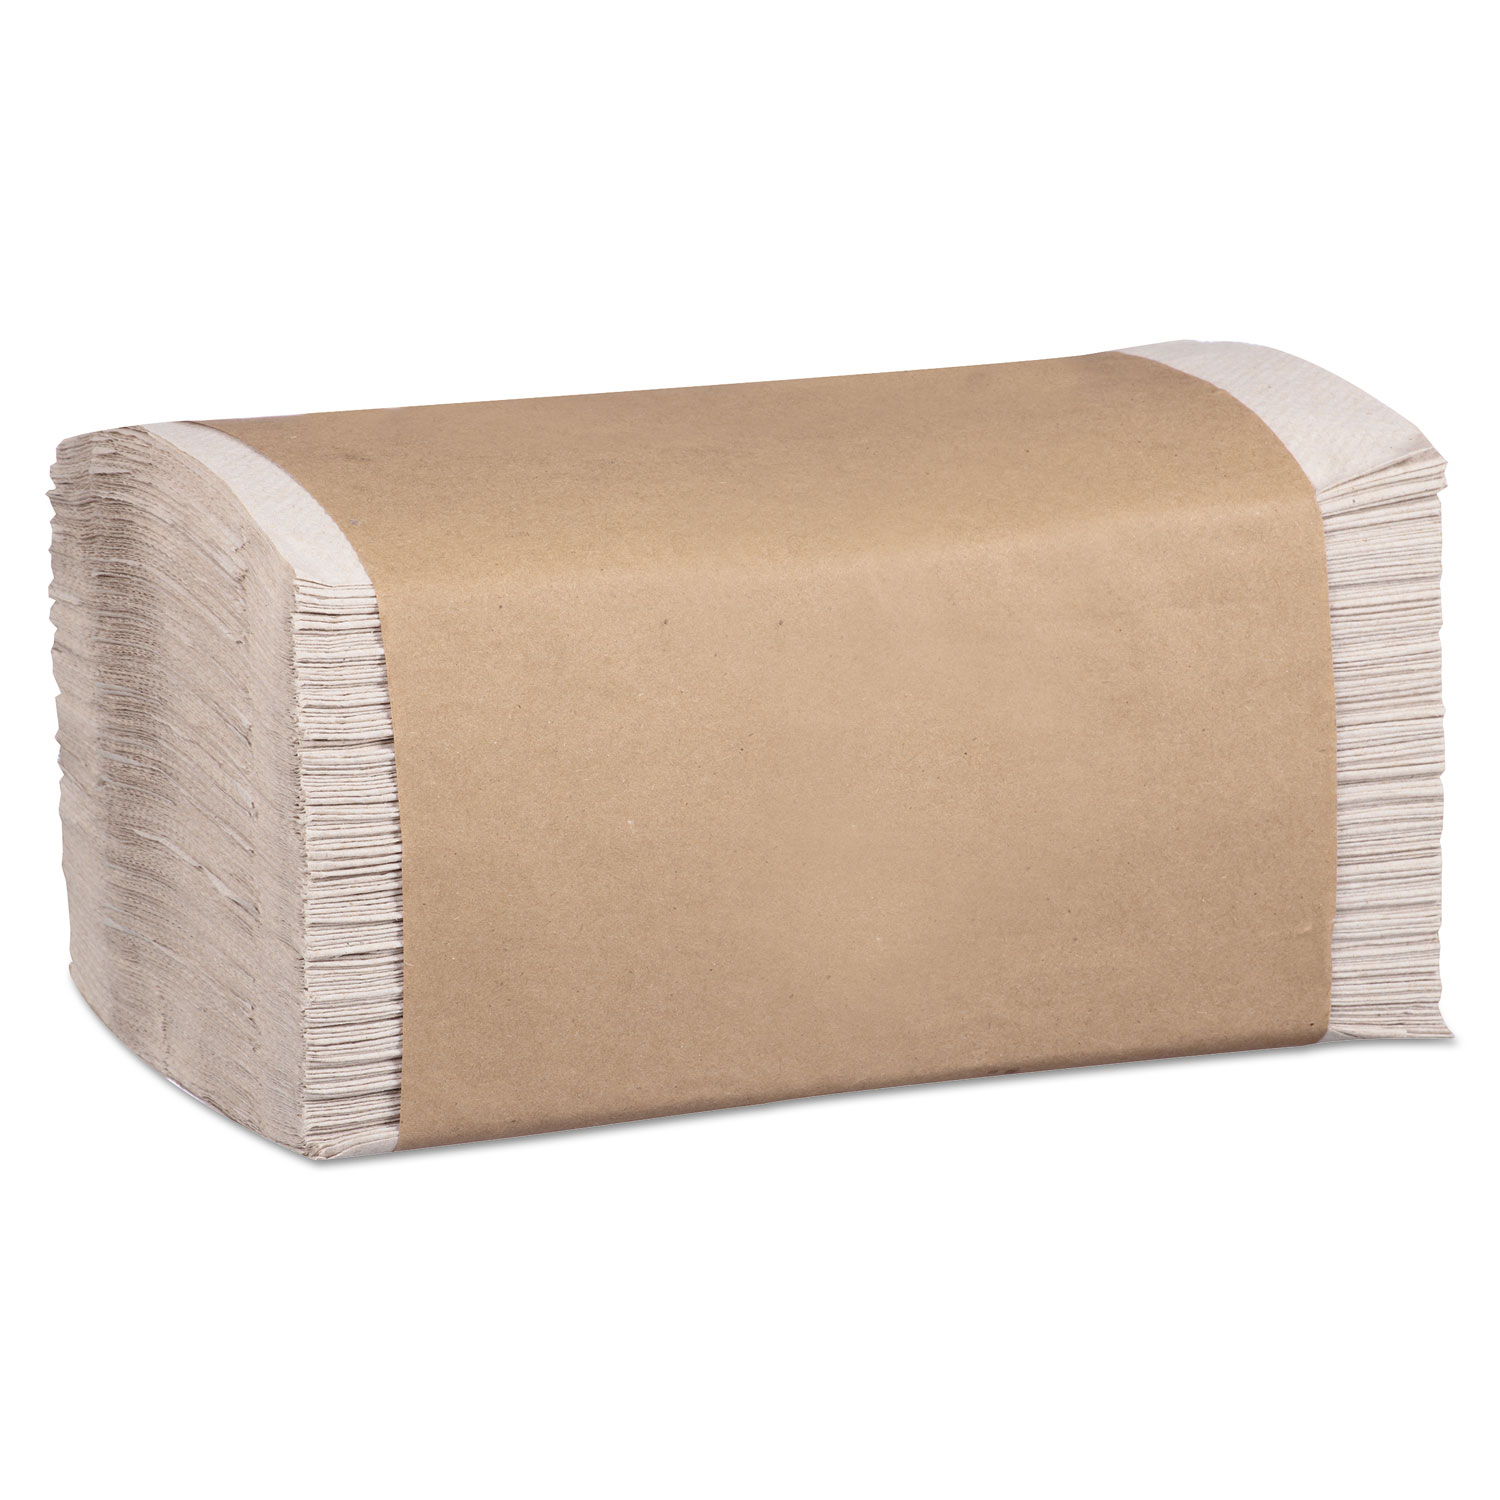  Marcal PRO P600N 100% Recycled Folded Paper Towels, 1-Ply, 8.62 x 10 1/4, Natural, 334/PK,12PK/CT (MRCP600N) 